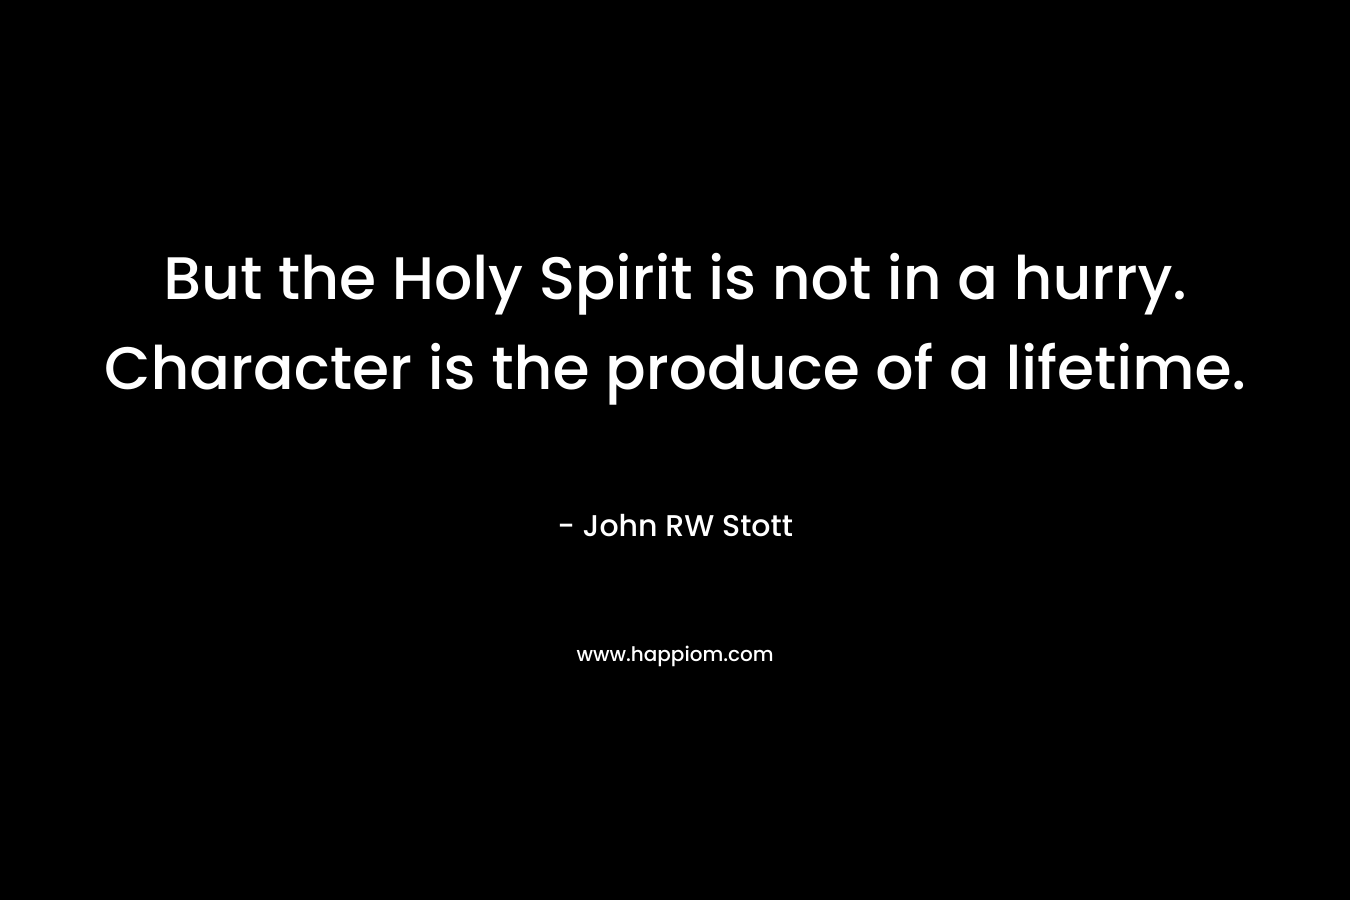 But the Holy Spirit is not in a hurry. Character is the produce of a lifetime.